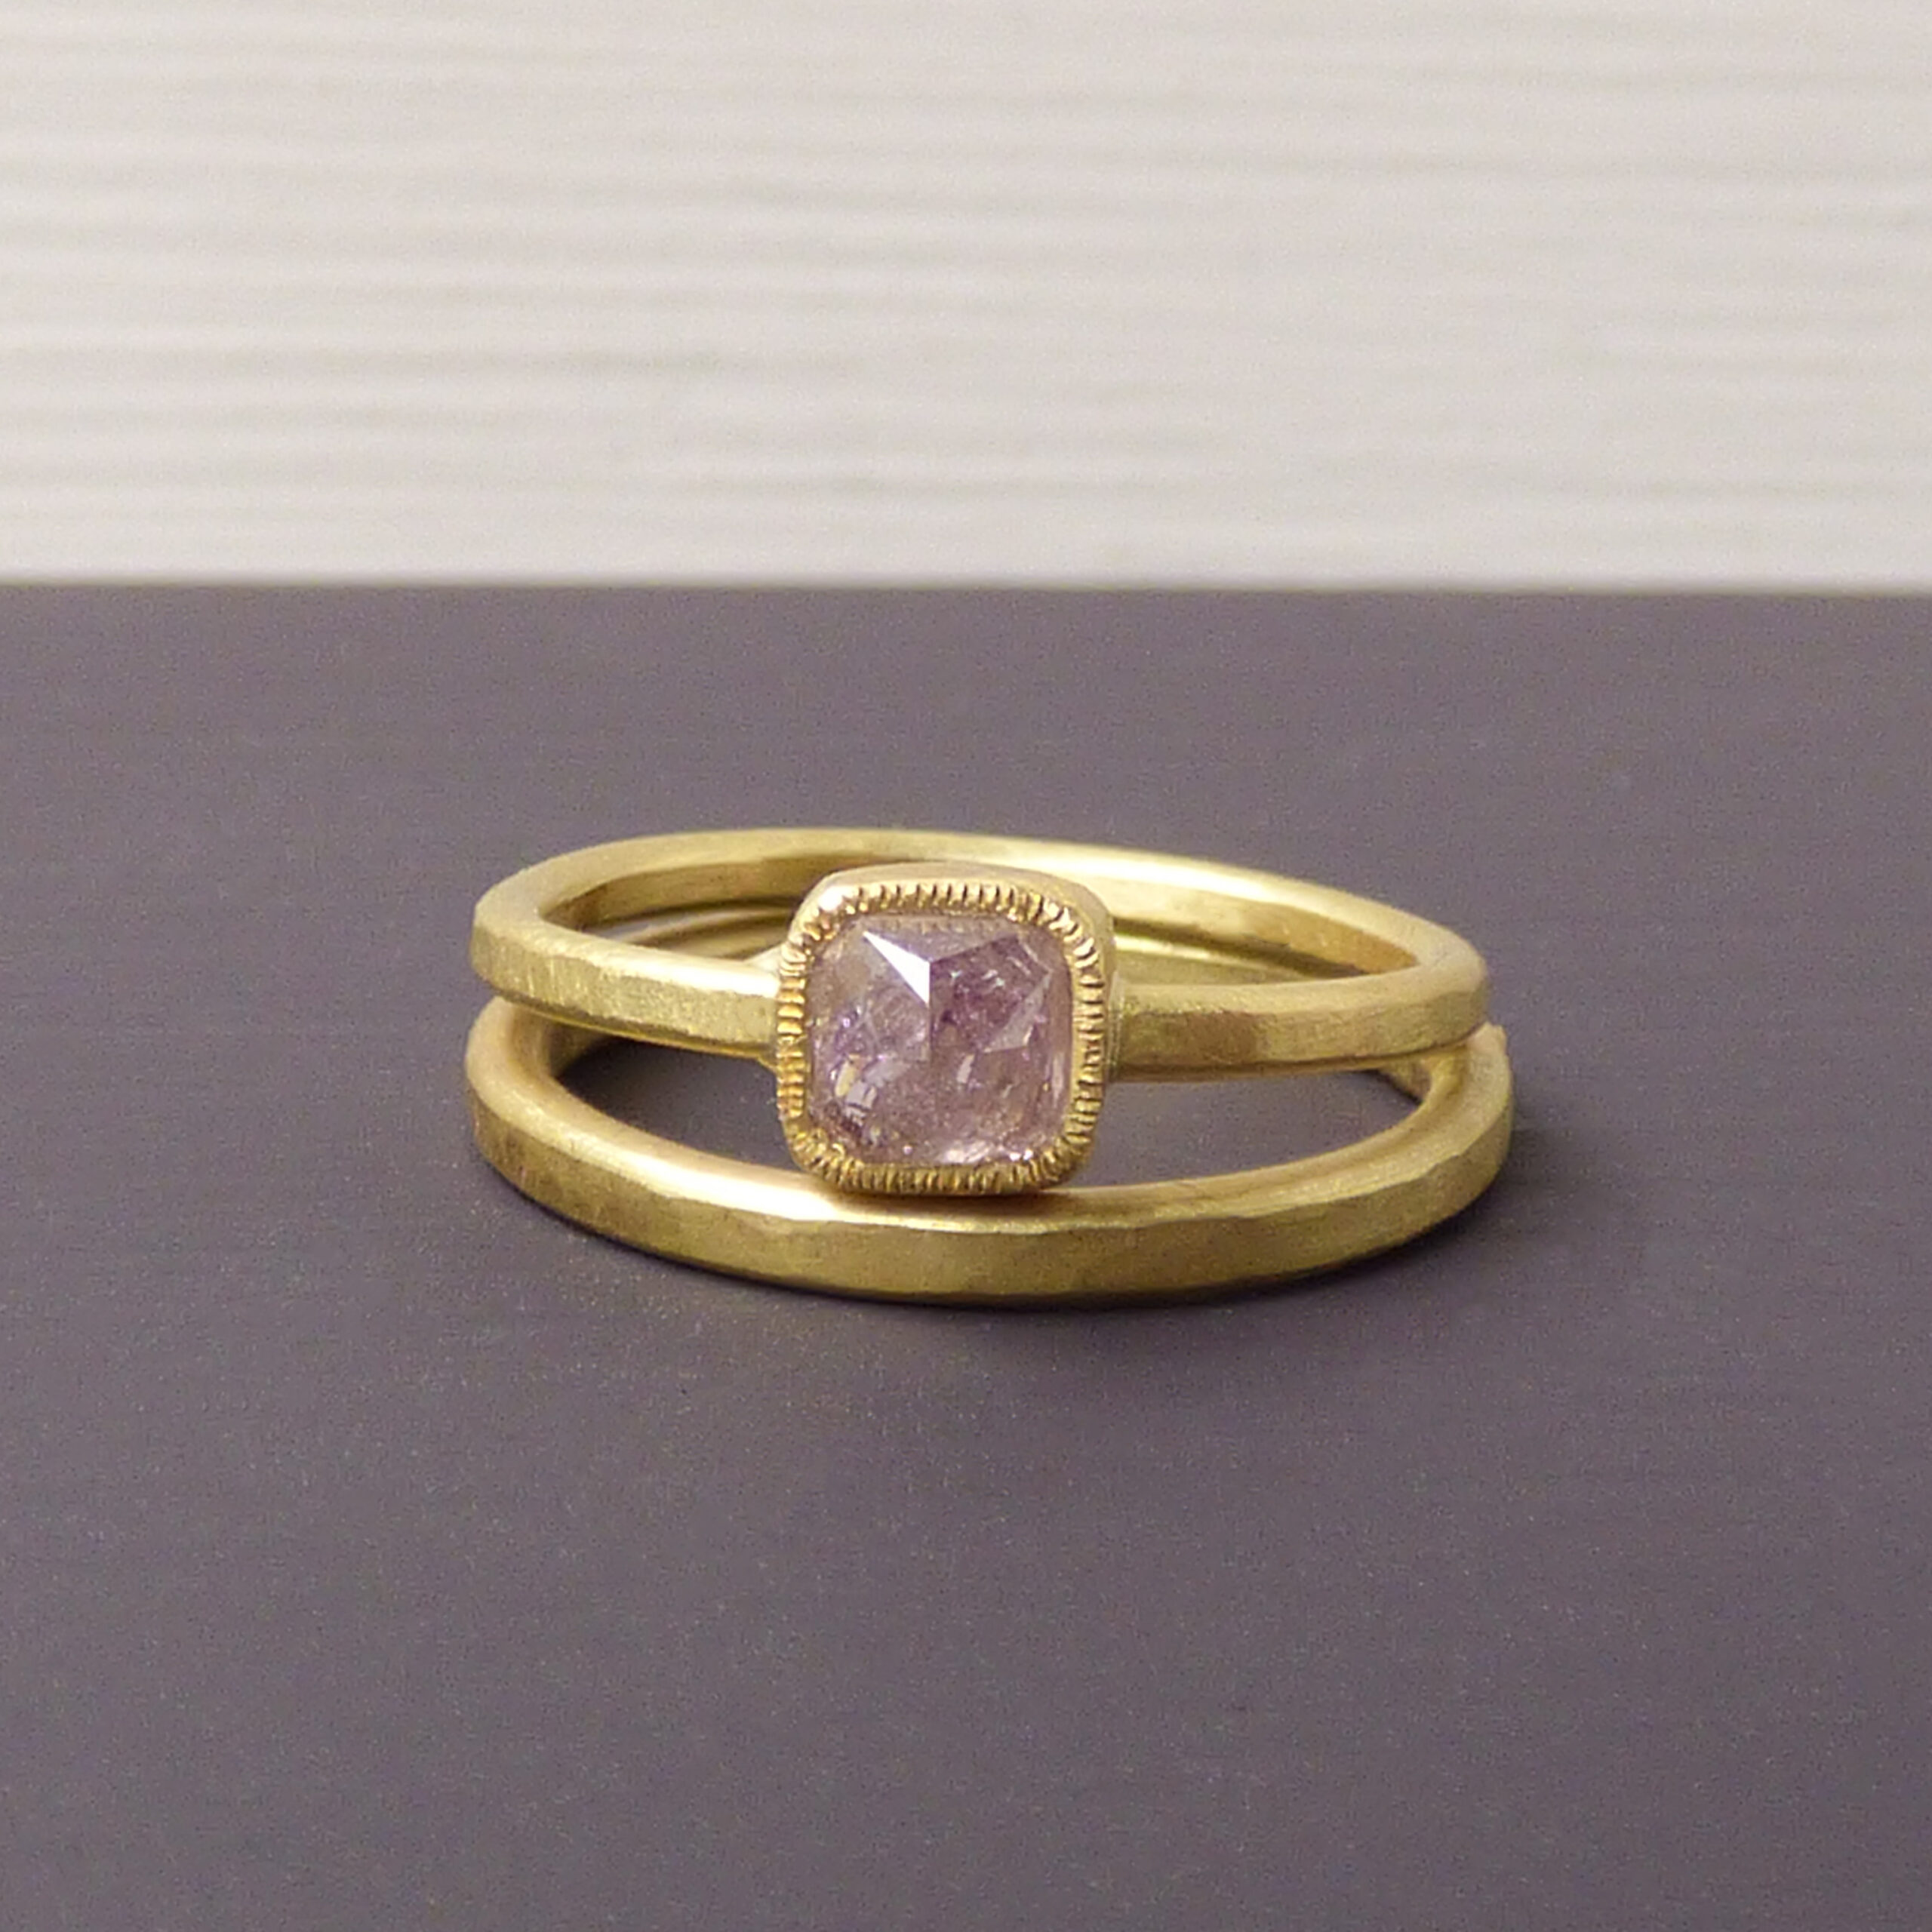 Zola pink diamond ethical engagement ring with charly ethical wedding band